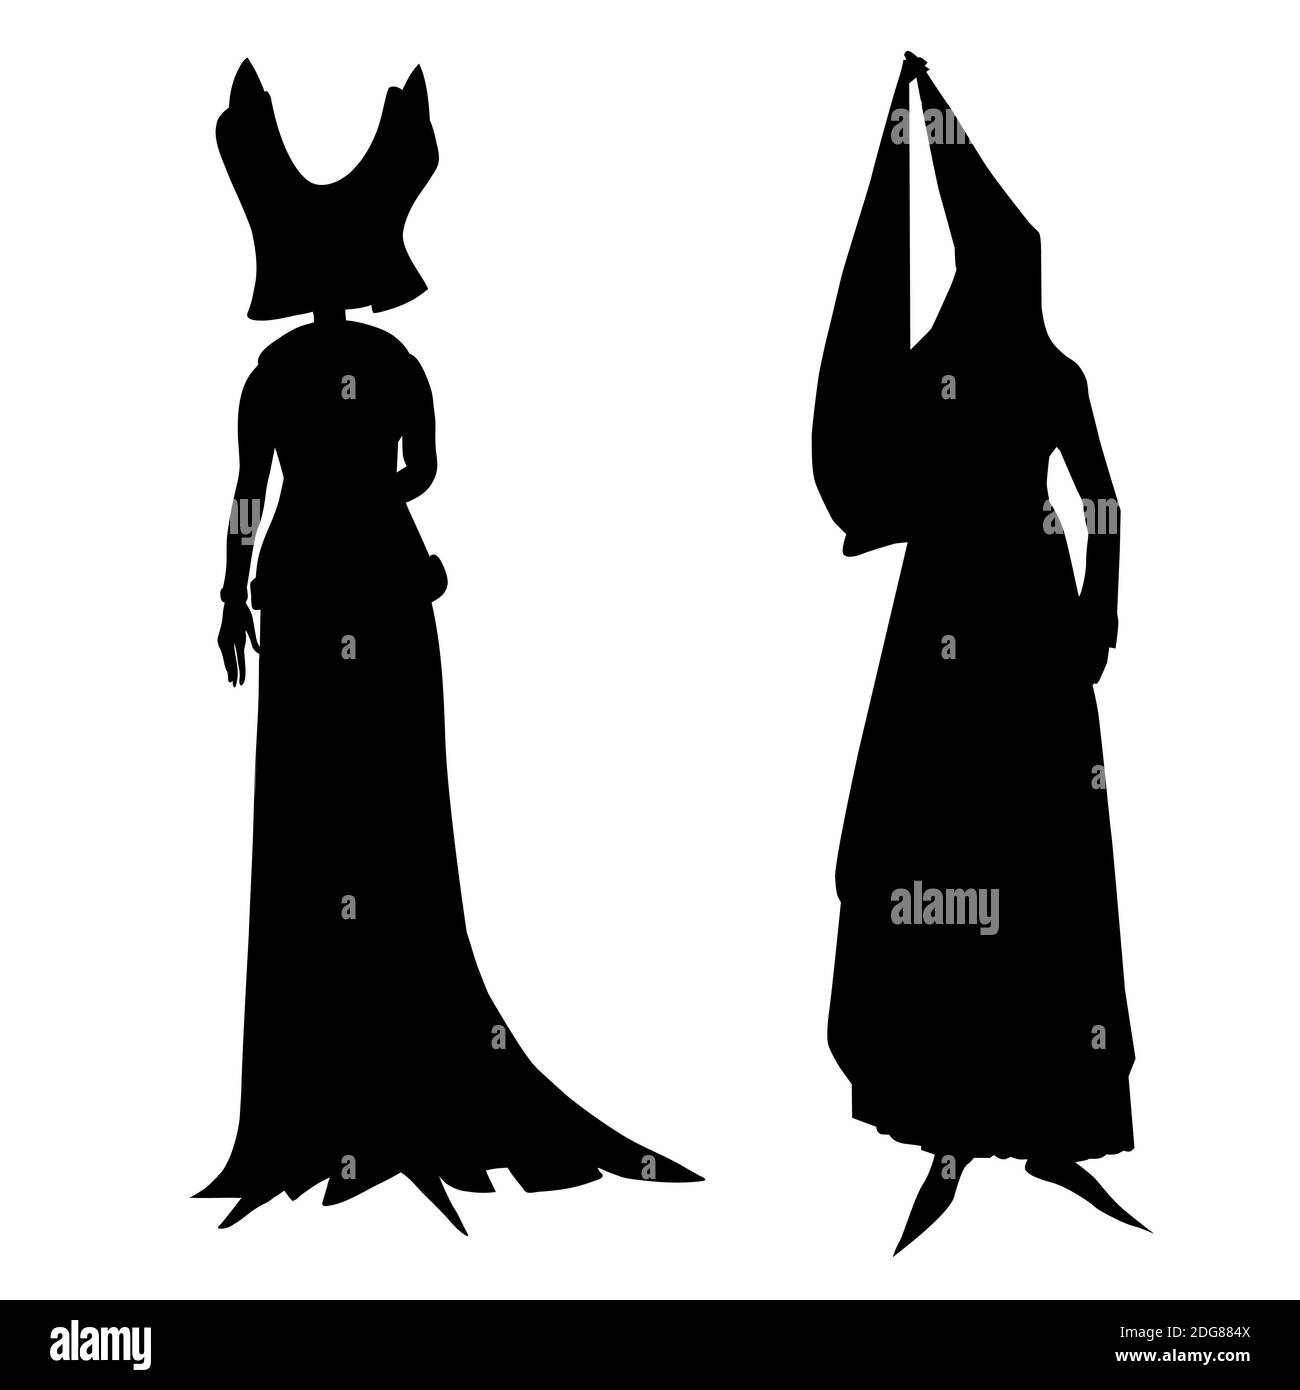 Silhouettes of female medieval costumes Stock Photo